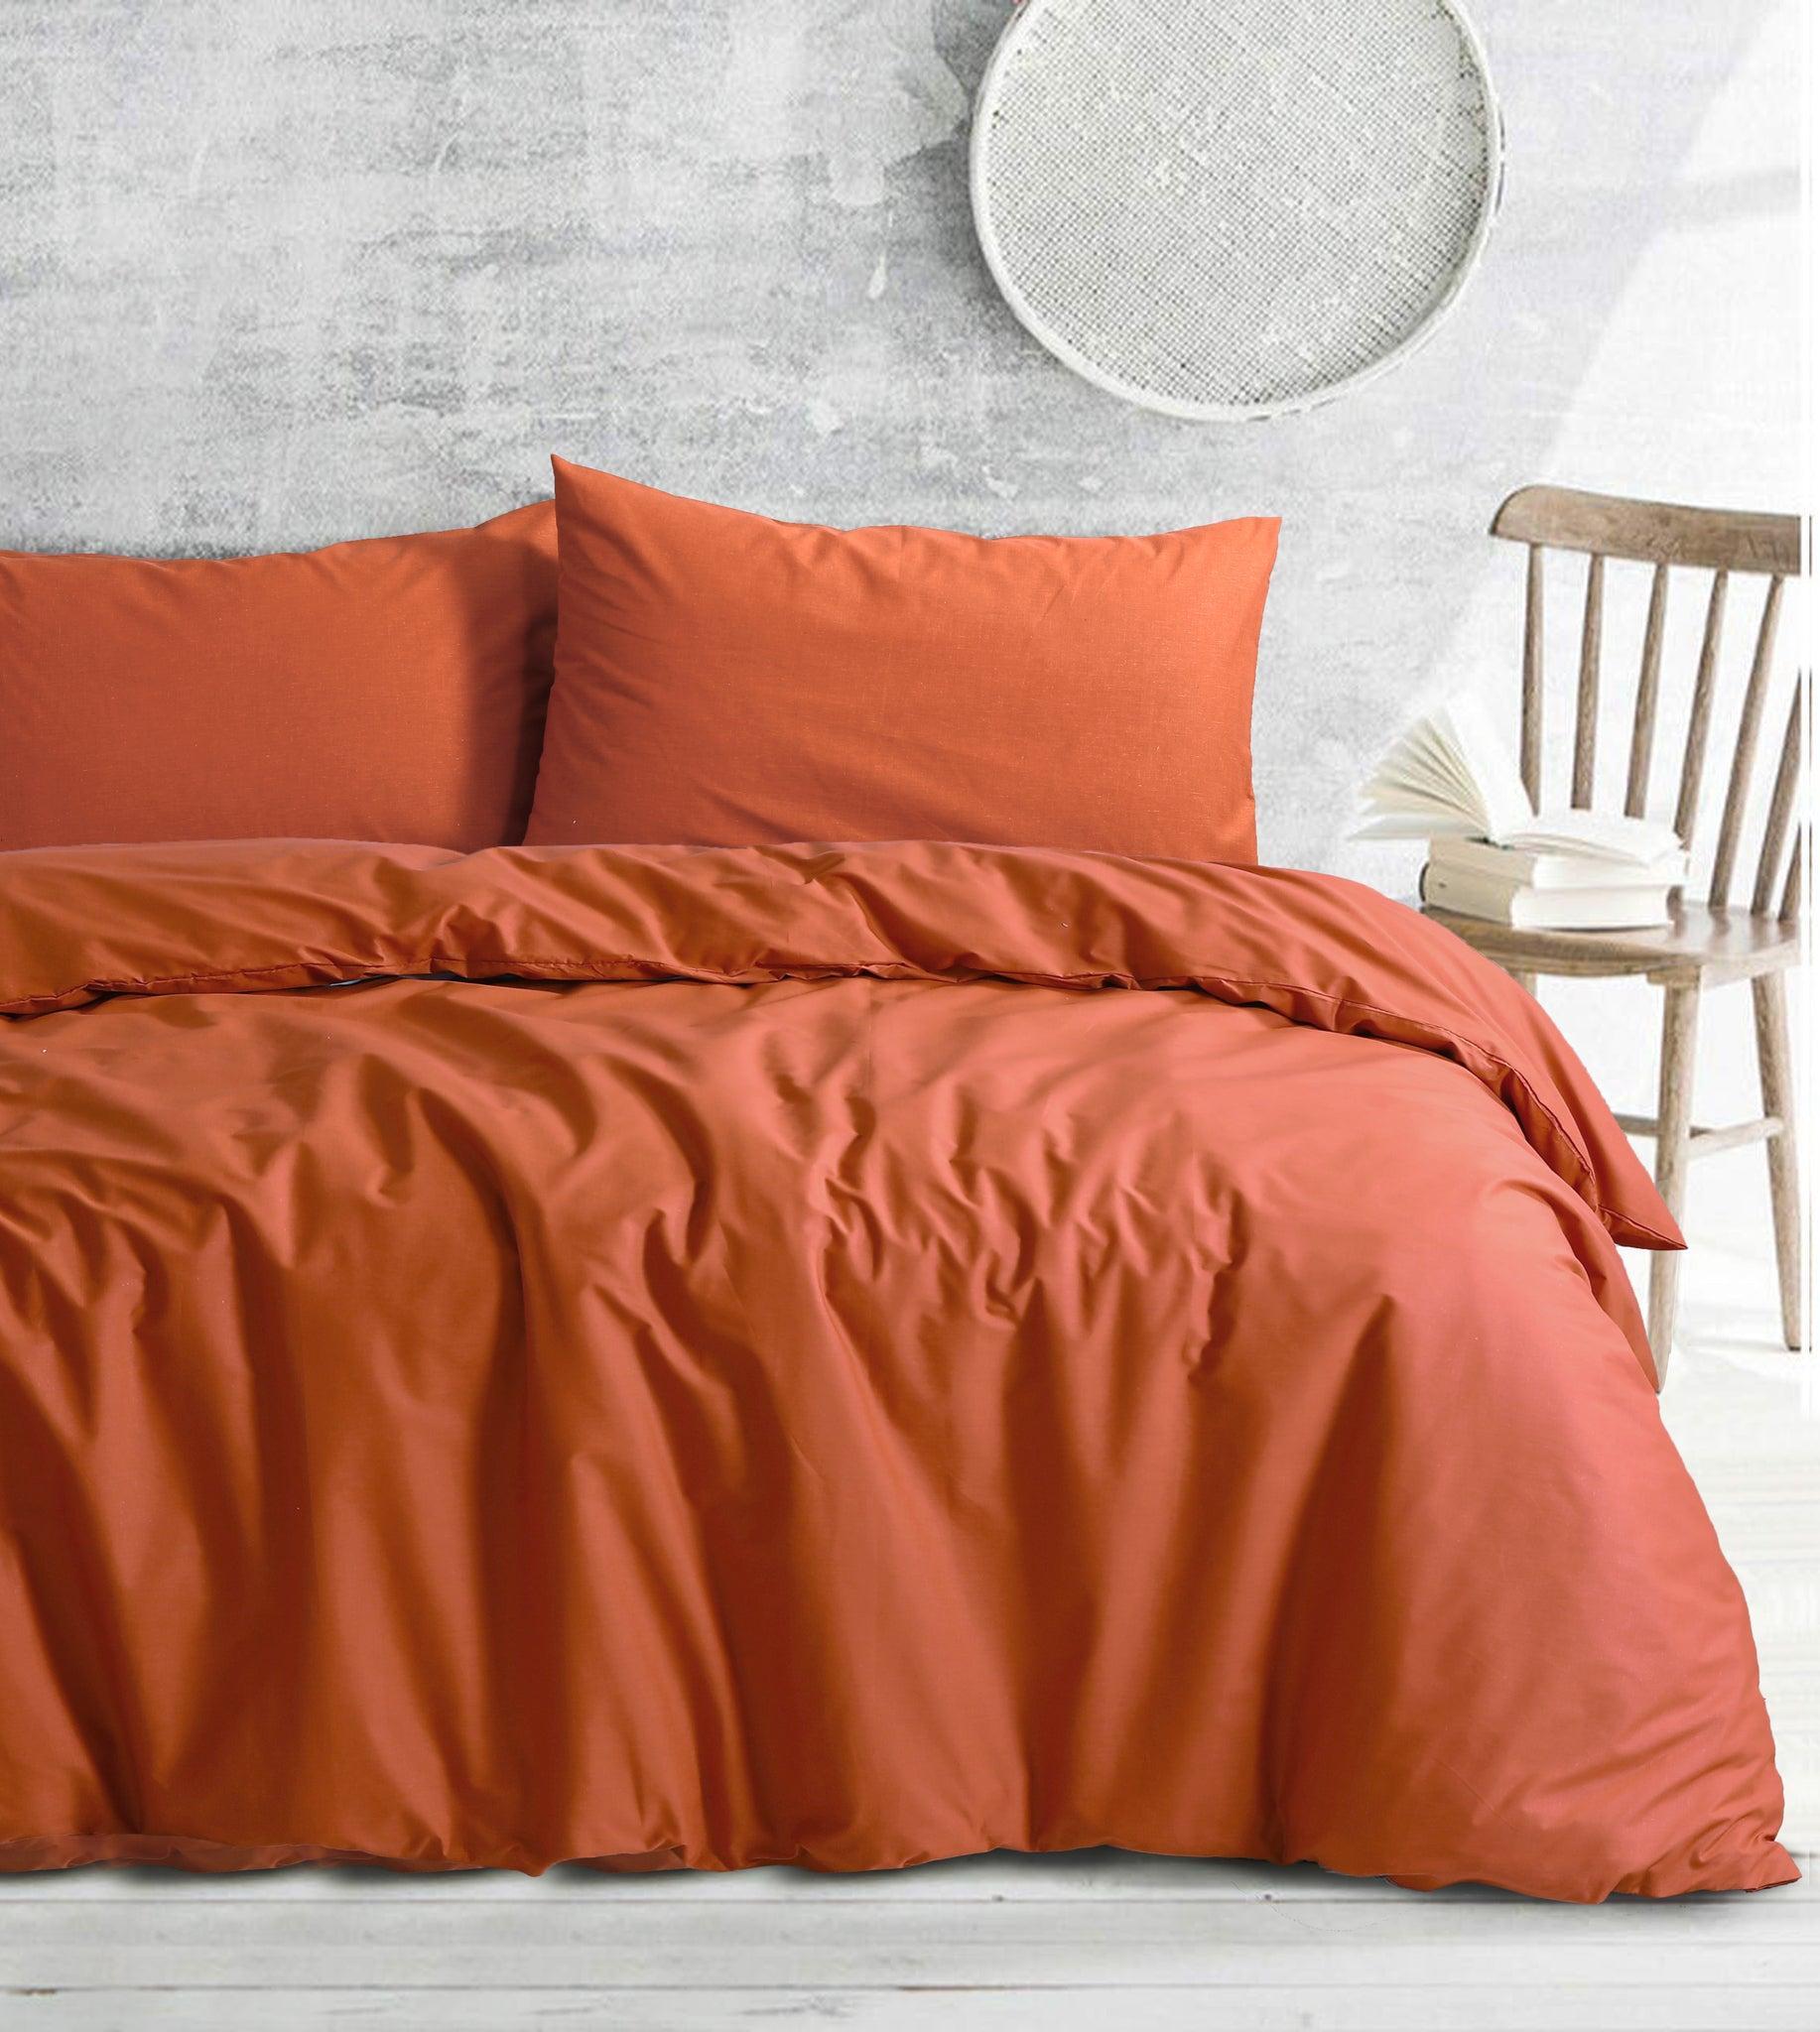 Amsons Royale Cotton Double Quilt Duvet Doona Cover Set with Europeon pillowcases - Rust